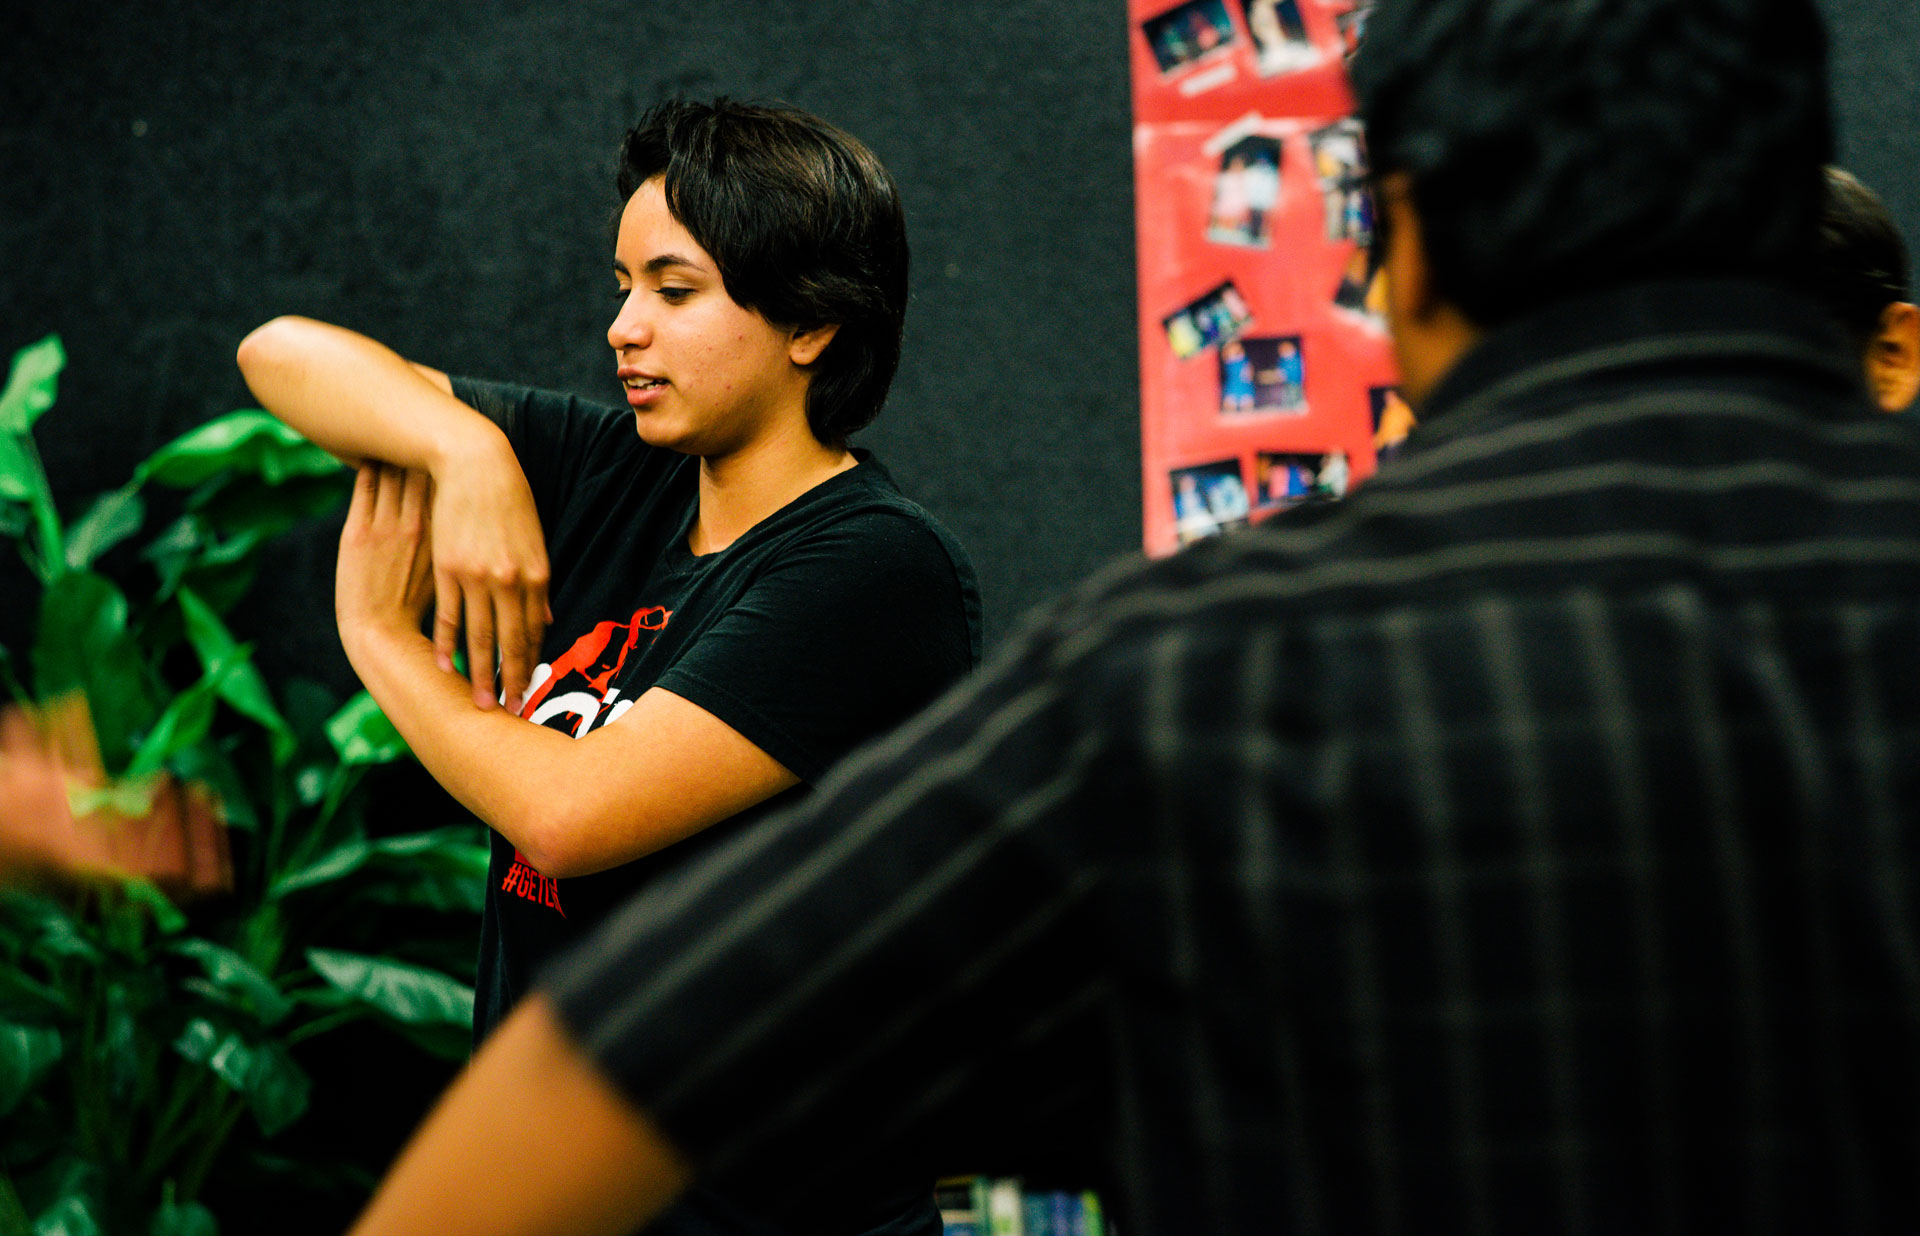 Rosy Mendez in her improv class at Desert Mirage High School. “I love photography and drama,” she says. “But my dream is to become an engineer."